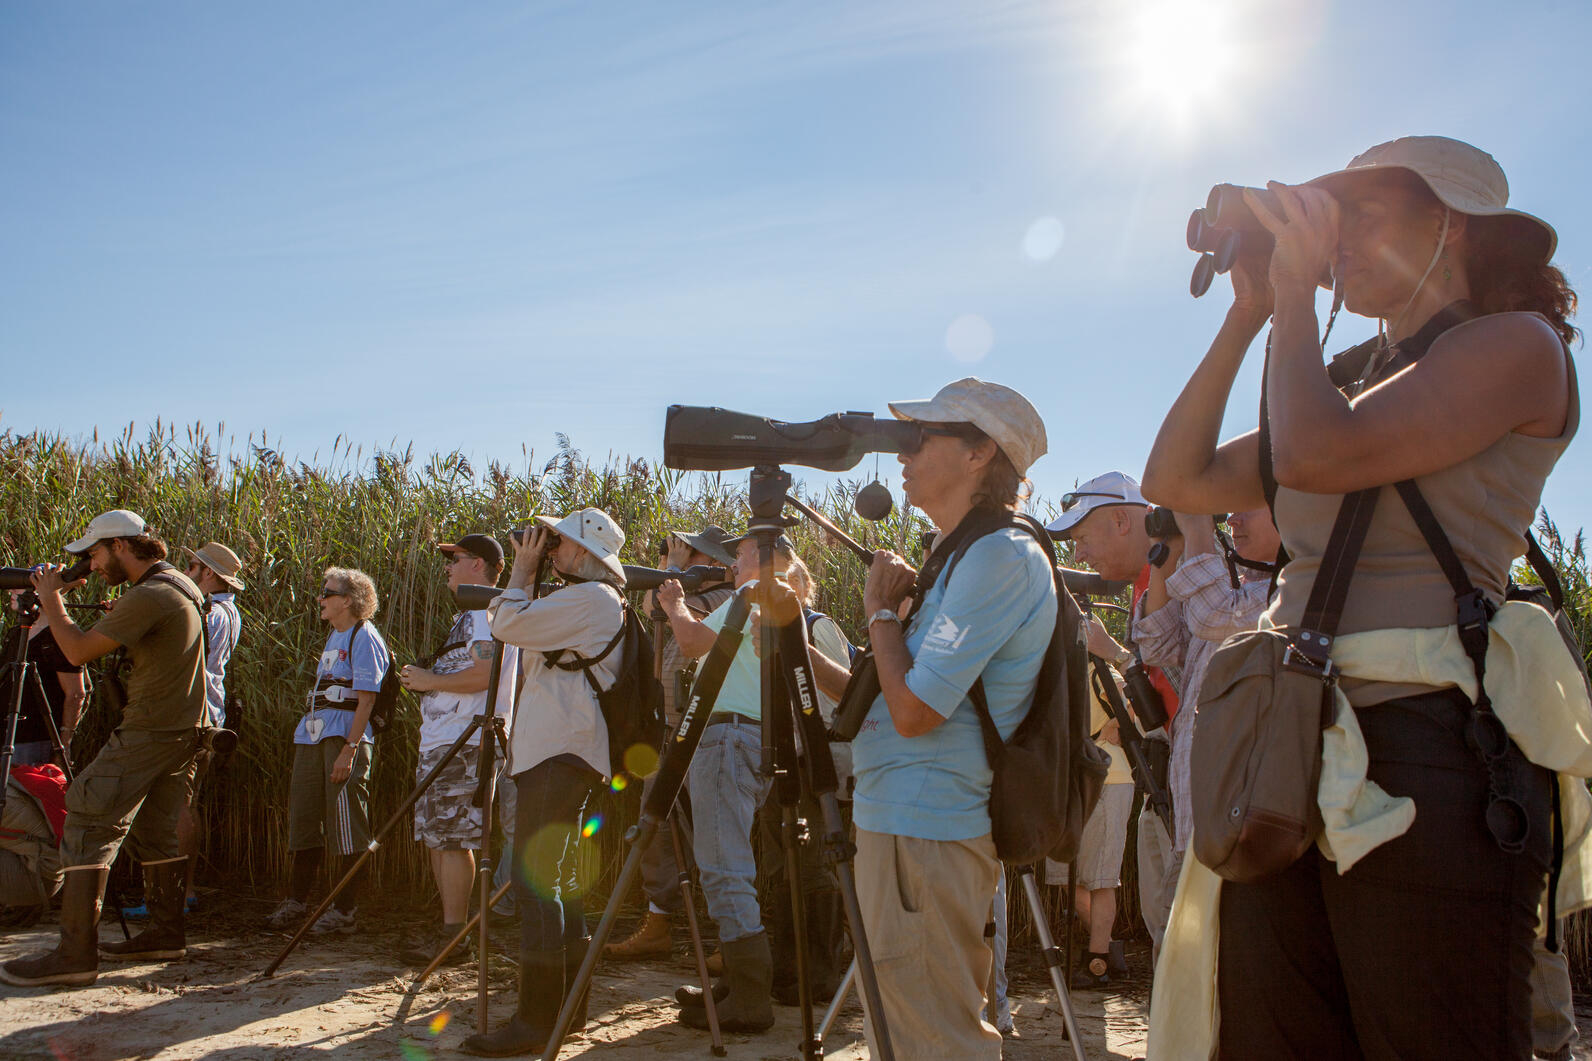 A group of birders gathered along a shoreline to observe birds from a distance.